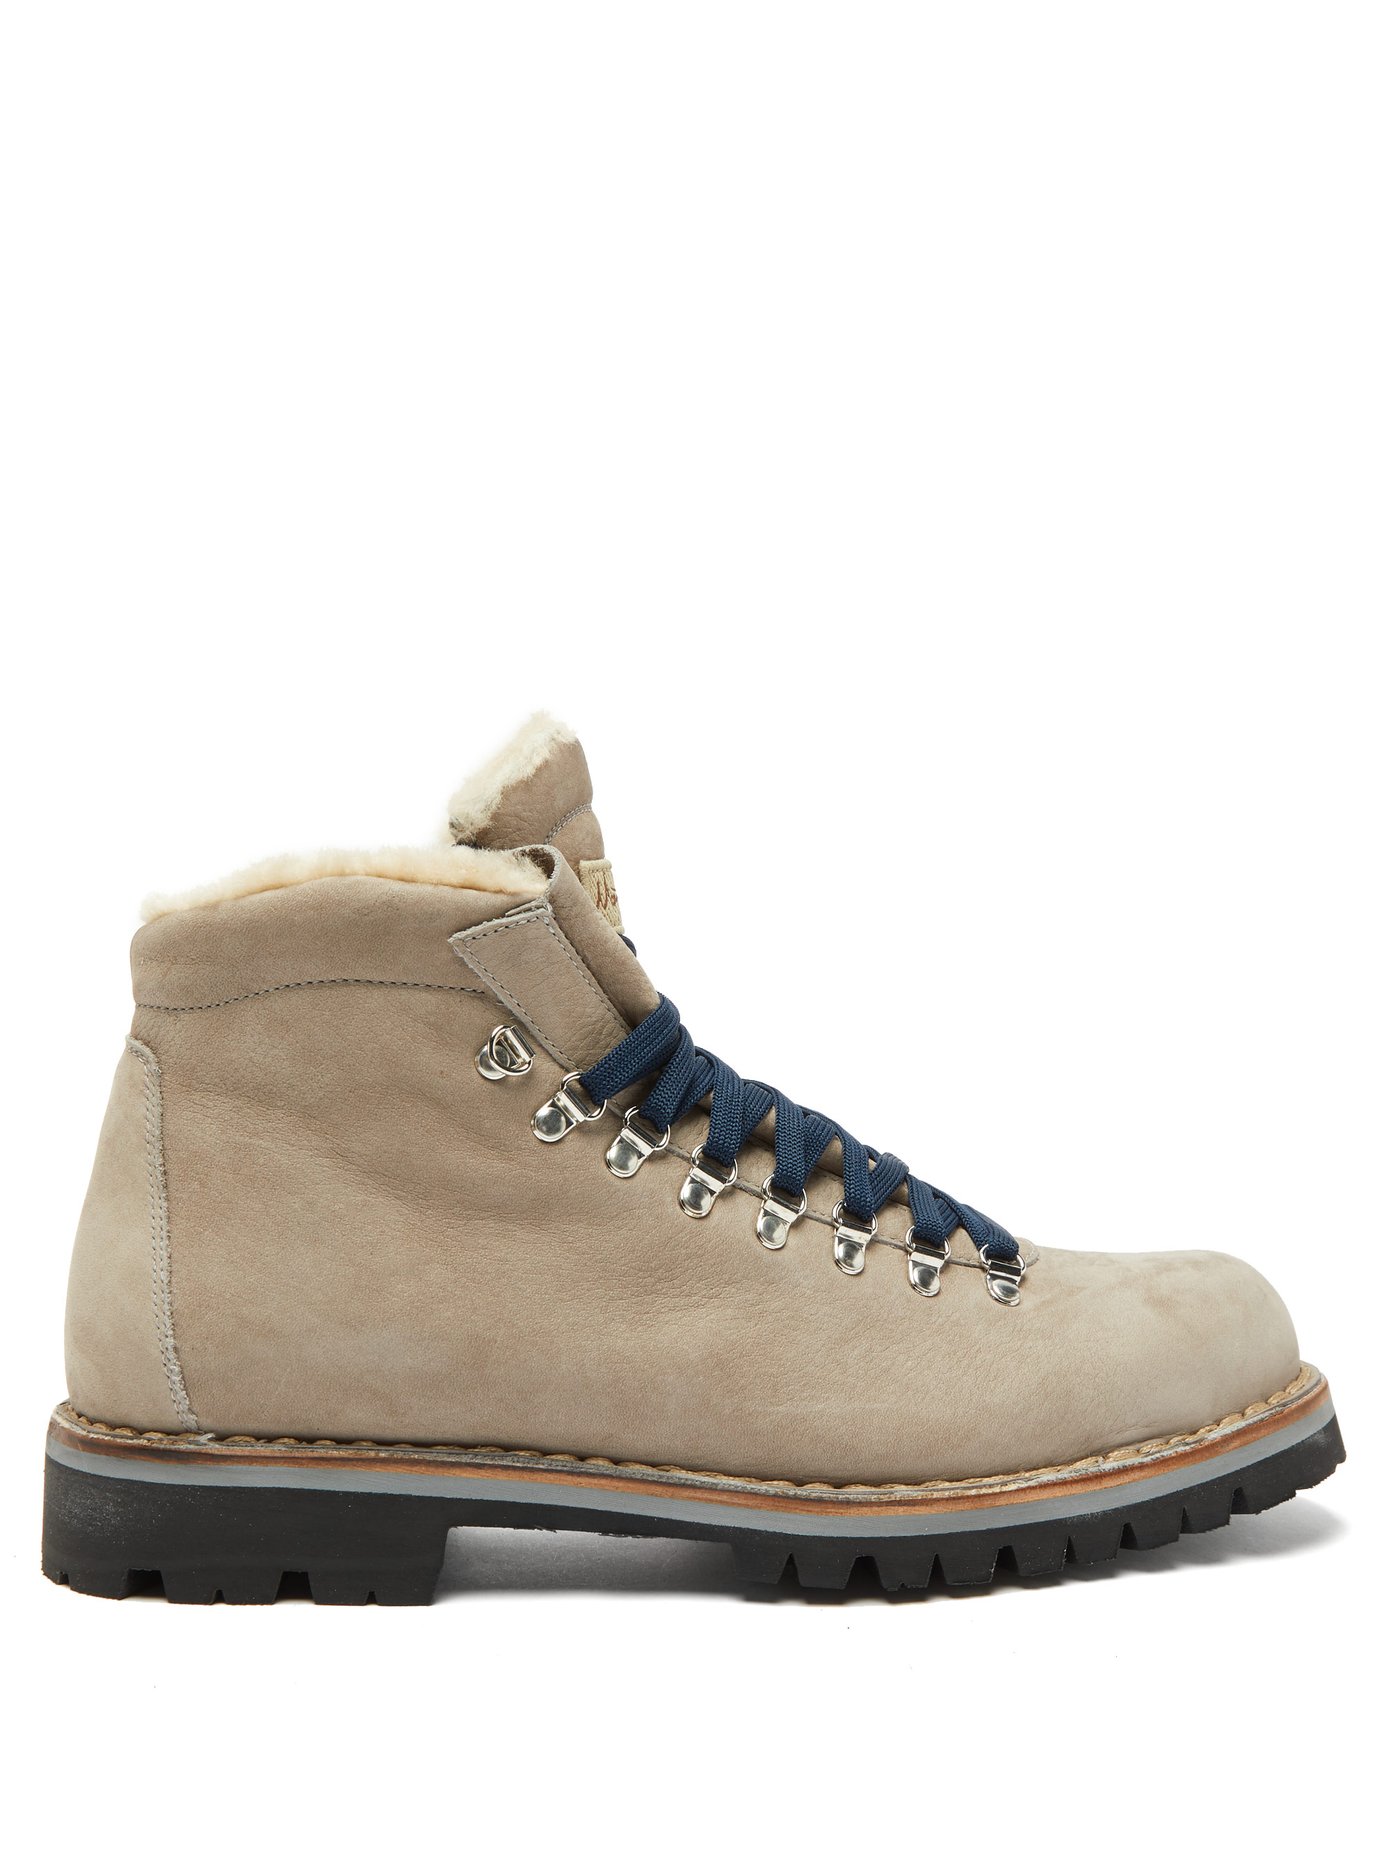 shearling lined hiking boots